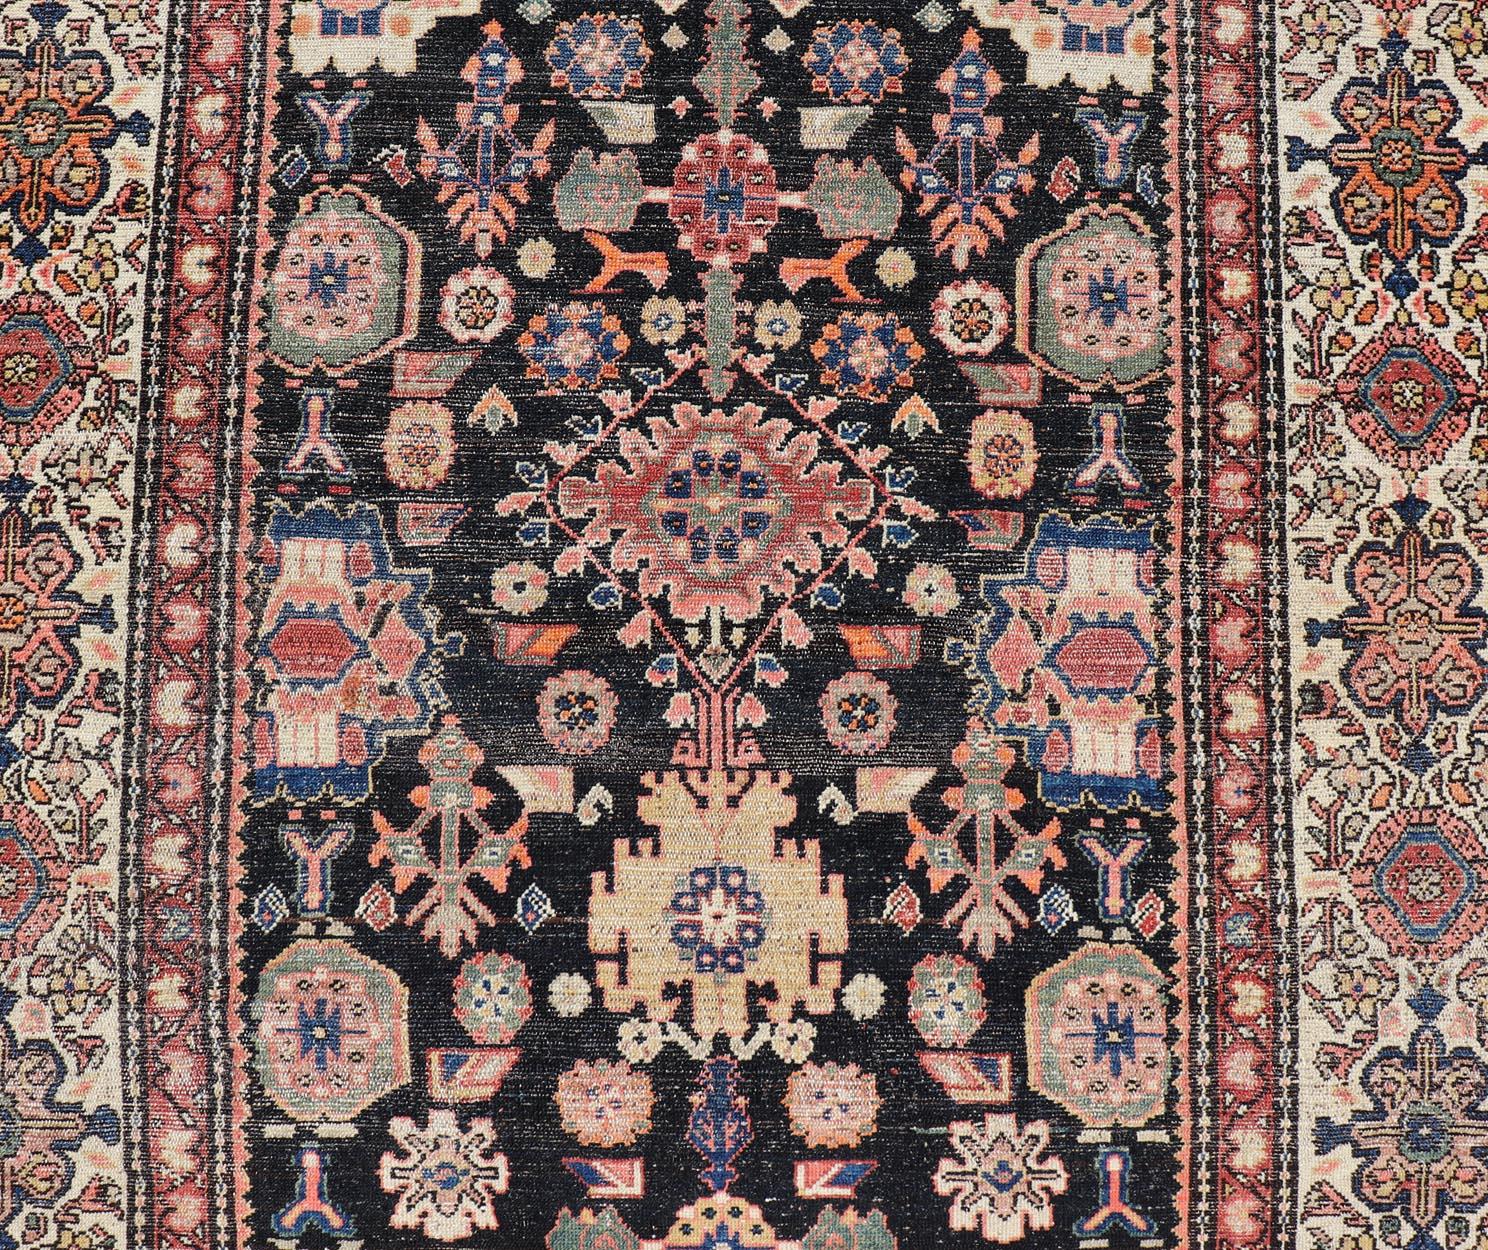 Antique N.W. Persian Large Gallery Rug in navy Blue Background, And All-Over Design. Country of Origin: Iran; Type: N.W. Persian; Design: Floral; Rug/ EMB-222222-15468, circa 1900
Antique N.W. Persian Large Gallery Rug in Navy Blue Background &All